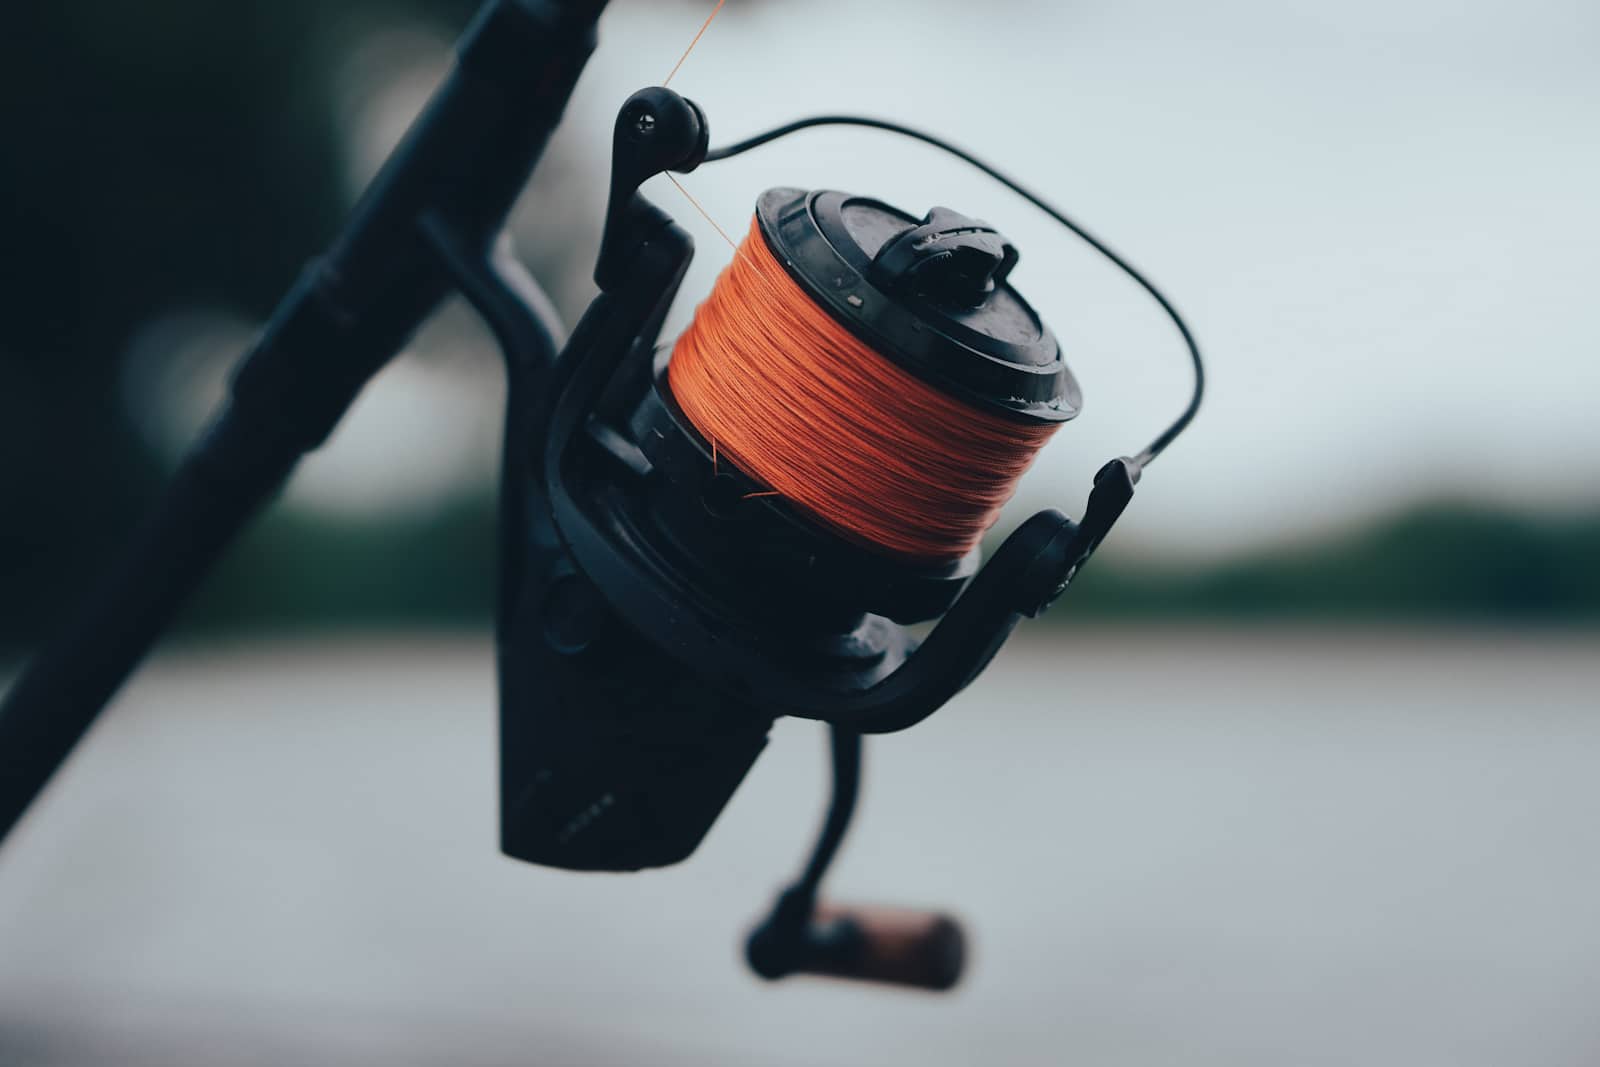 A close-up image of a reel of fishing line.